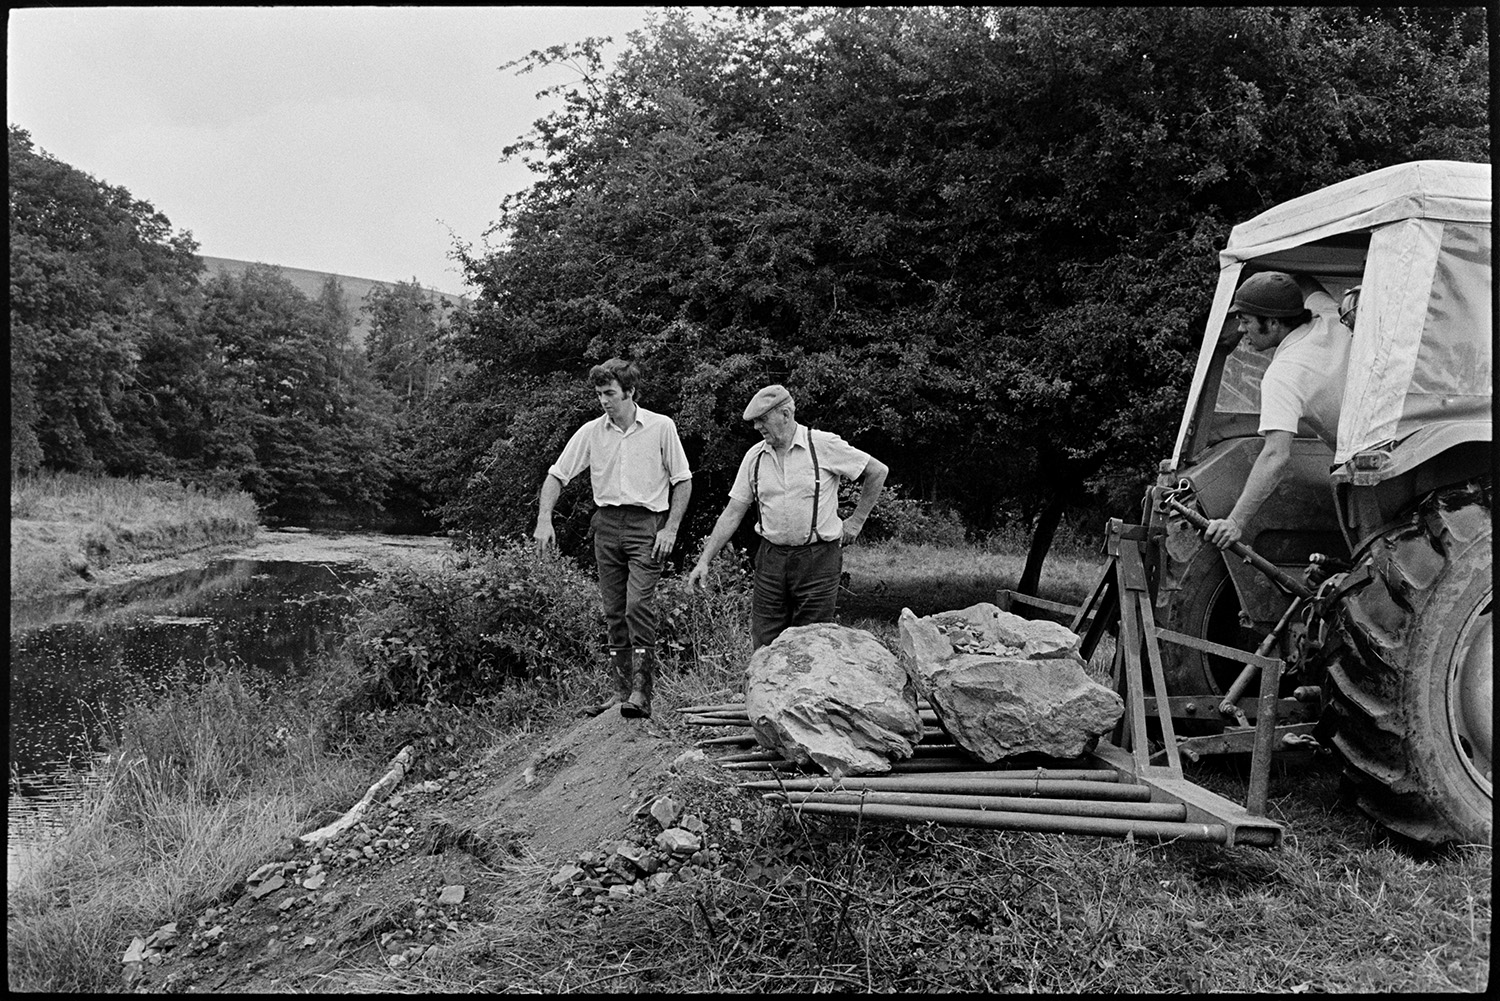 Farmers putting boulders to protect river bank. 
[John Ward and his two sons, Graham Ward and David Ward, moving boulders to a river bank using a tractor, to protect the bank from erosion, at Parsonage, Iddesleigh.]